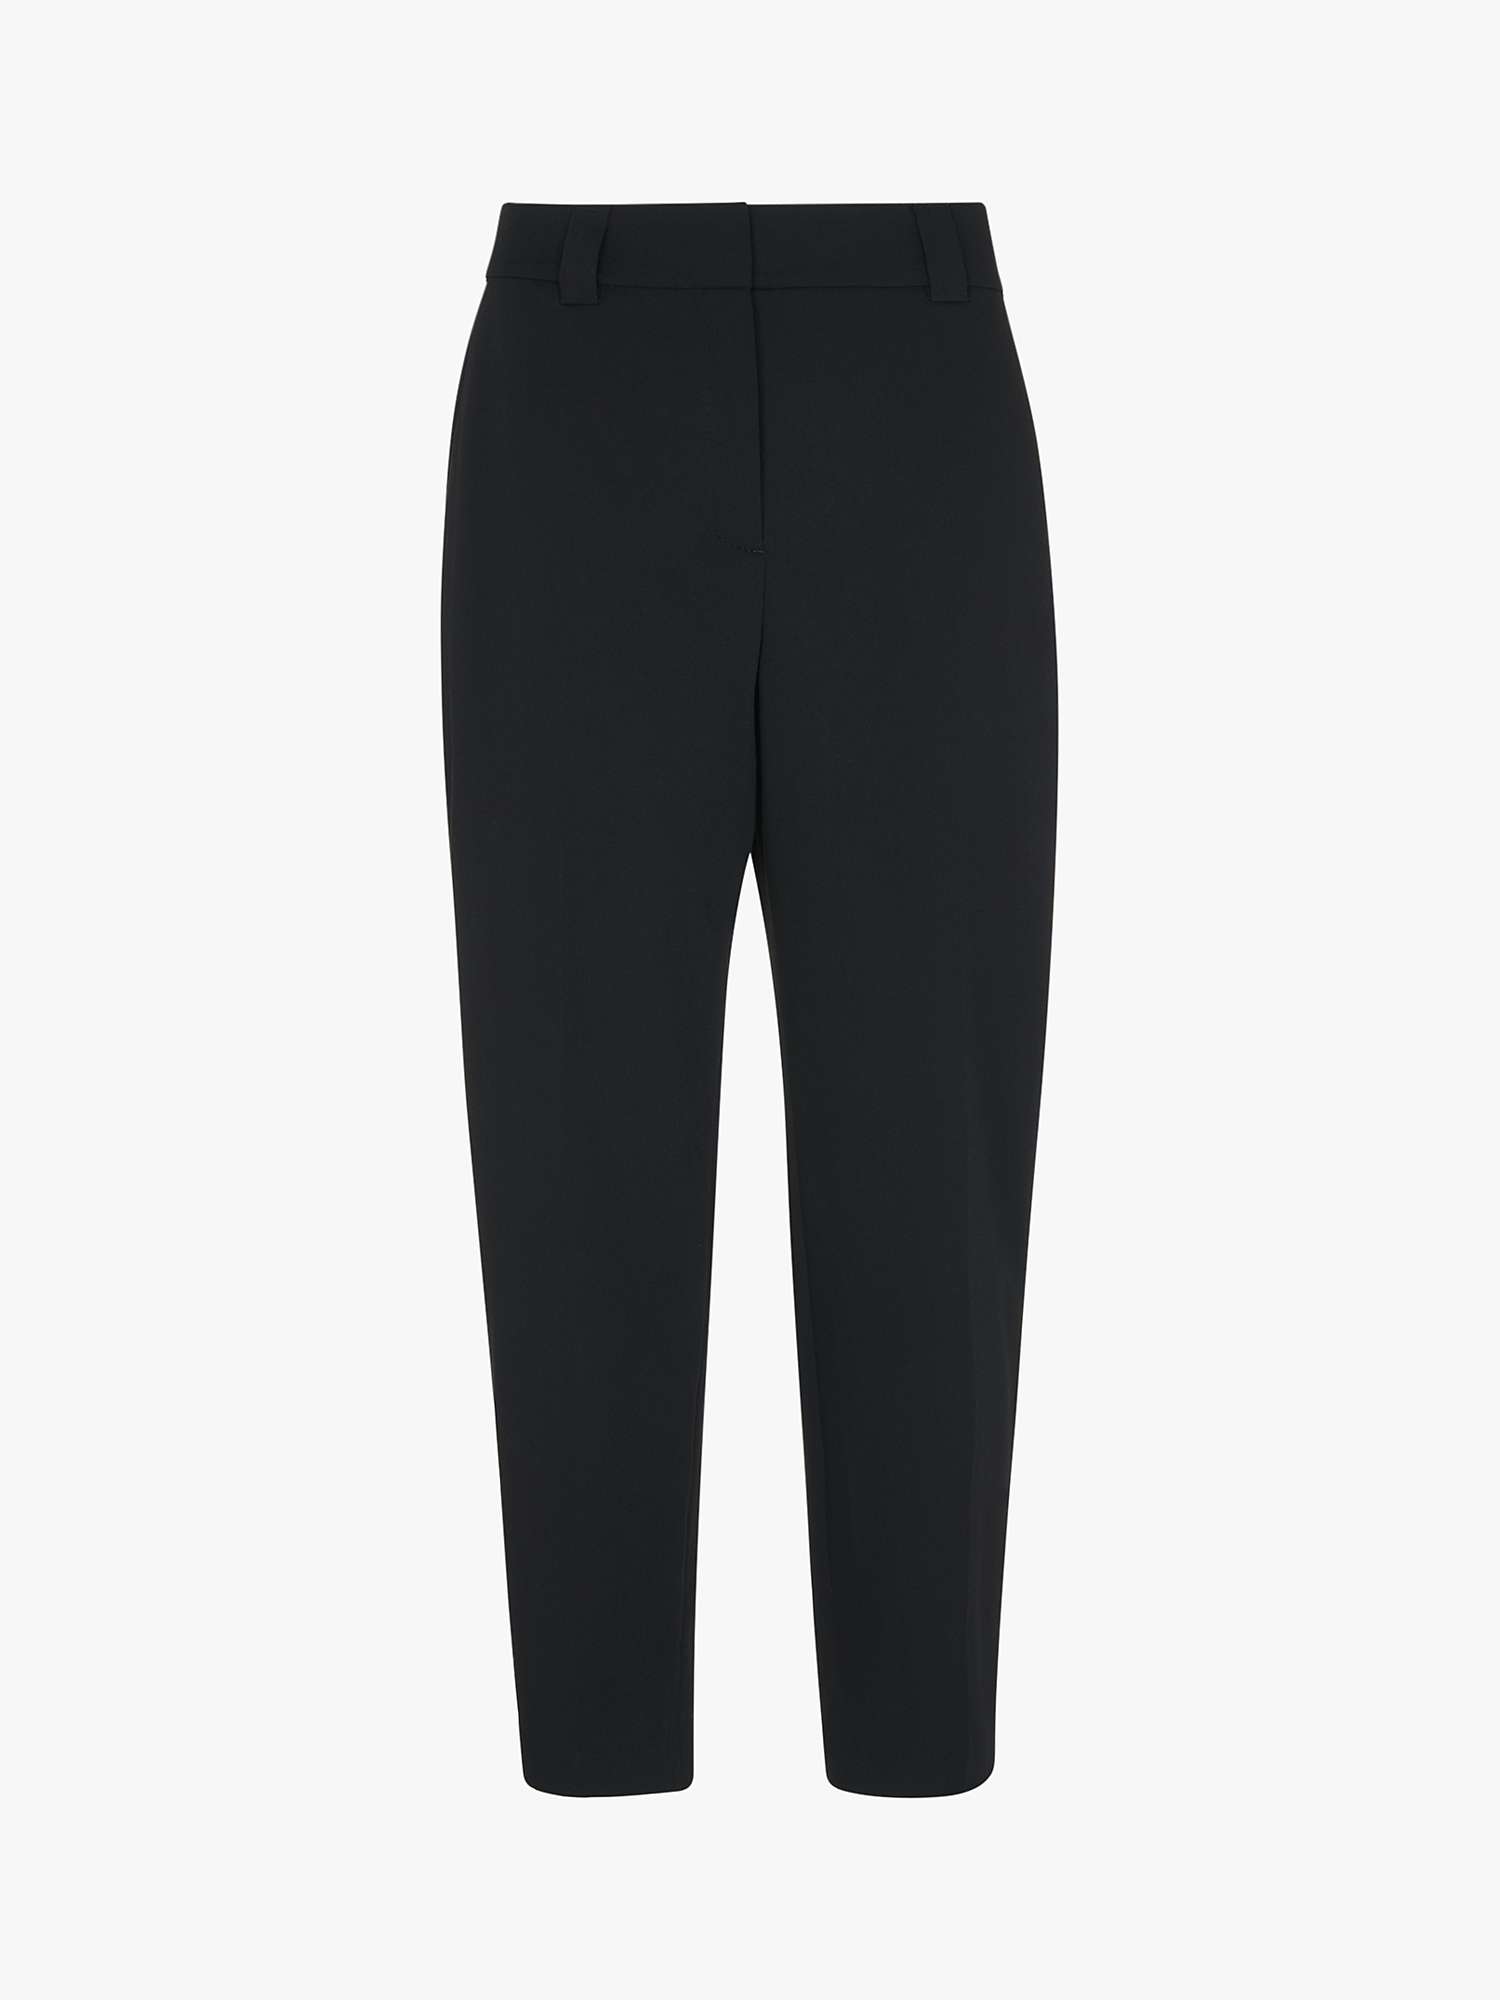 Buy Whistles Lucie Cigarette Wool Blend Trousers, Black Online at johnlewis.com